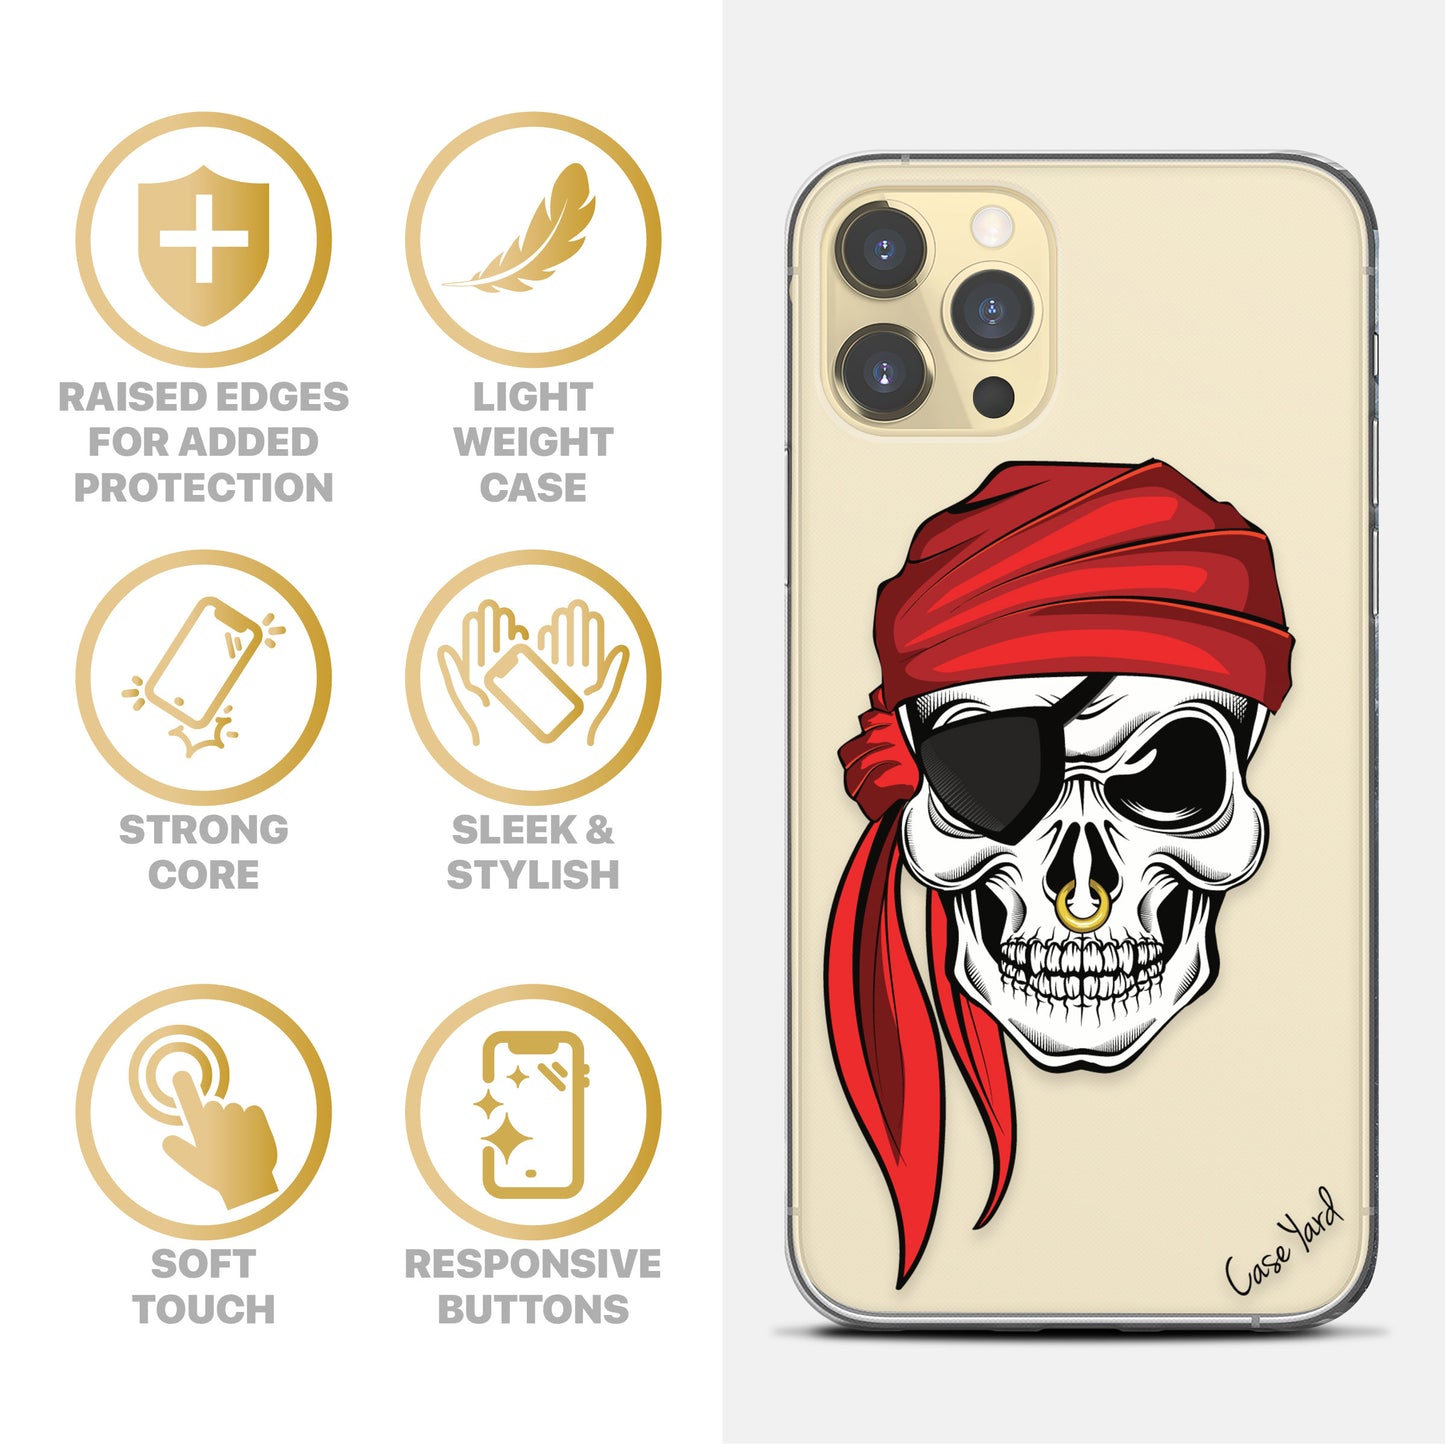 TPU Case Clear case with (Pirate Skull) Design for iPhone & Samsung Phones